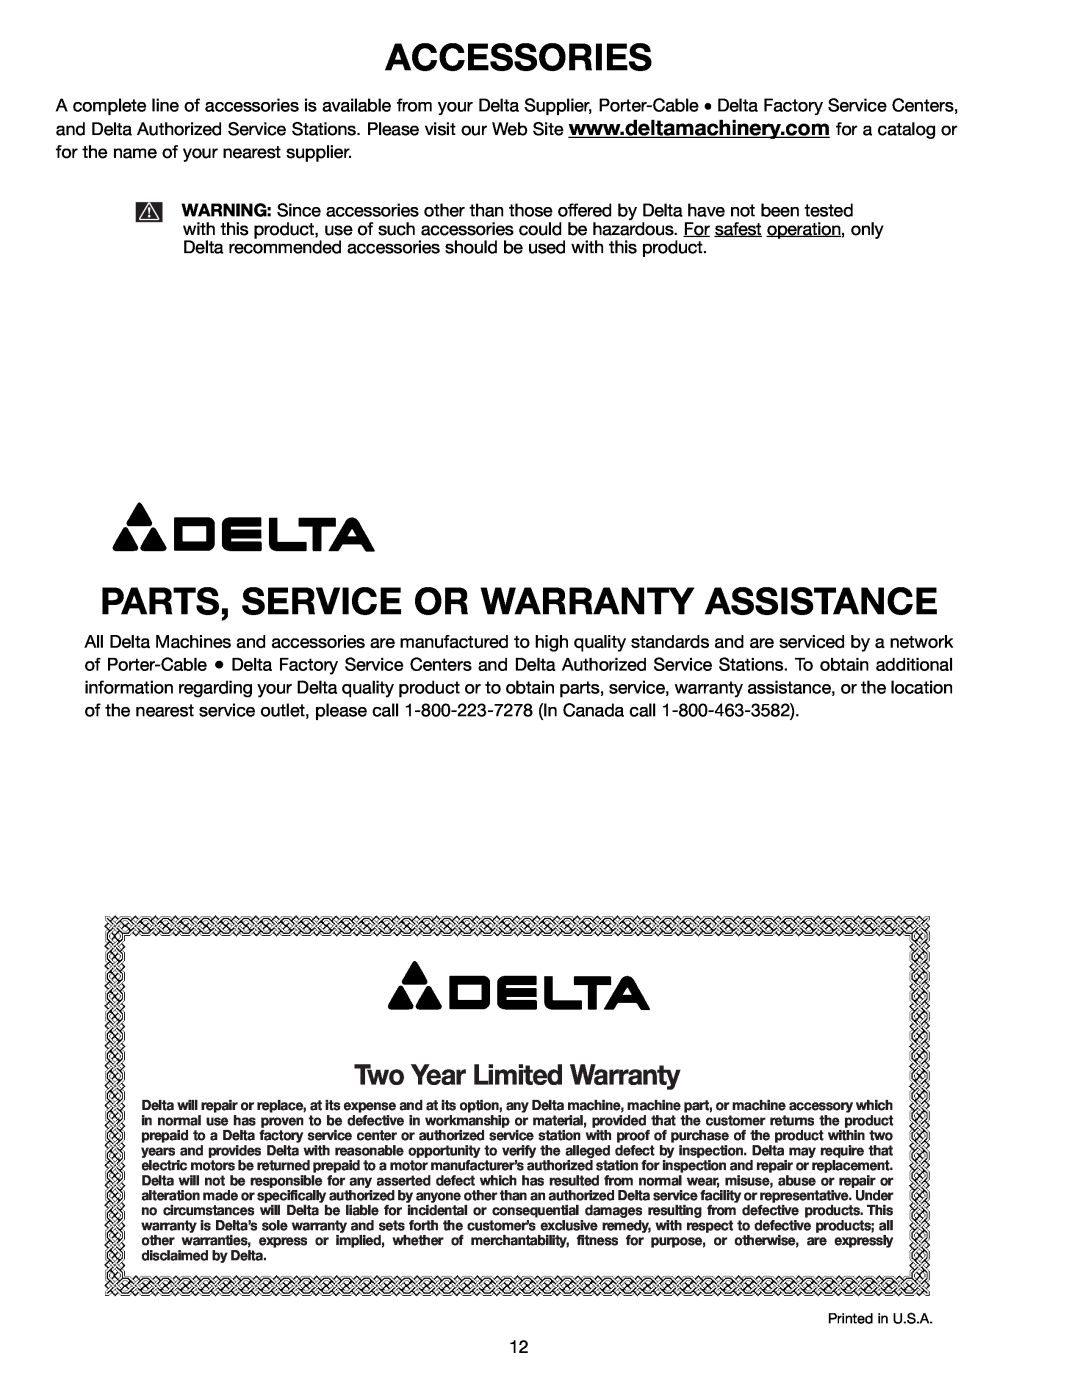 Delta AP200 instruction manual Accessories, Parts, Service Or Warranty Assistance, Two Year Limited Warranty 